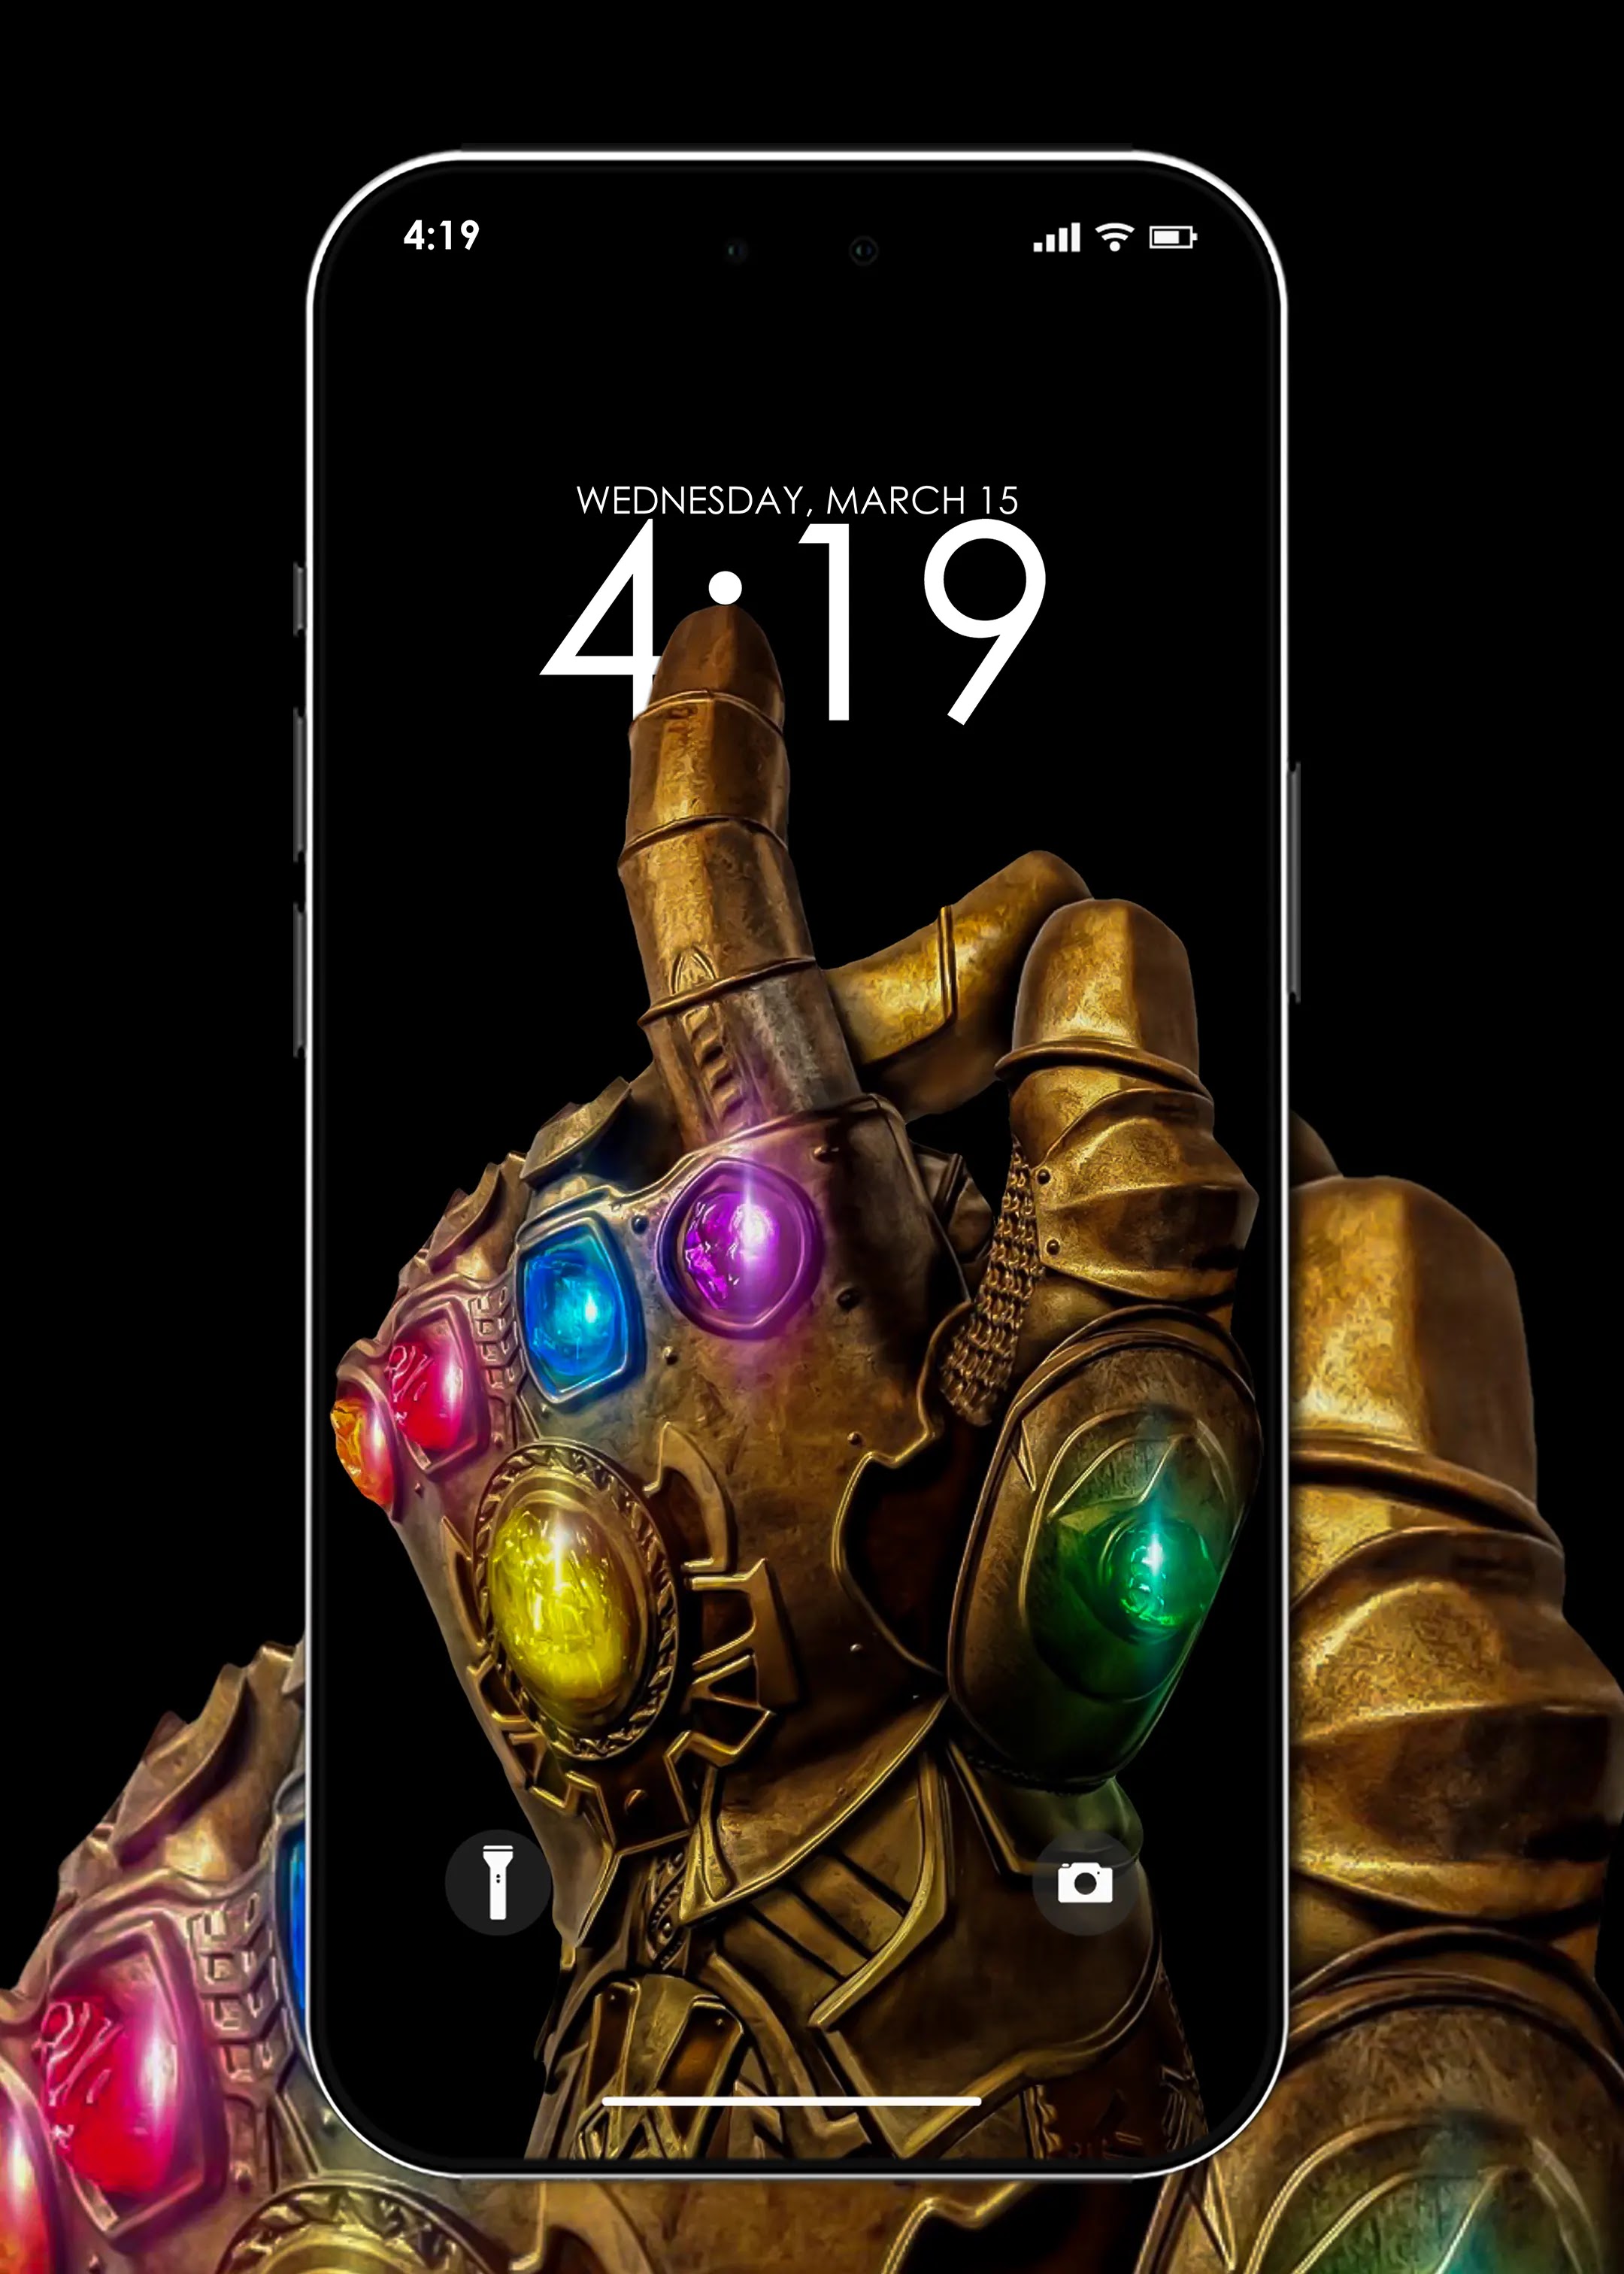 ios 16 avenger marvel infinity gauntlet of Thanos wallpaper for ios iphone and android mobile phone